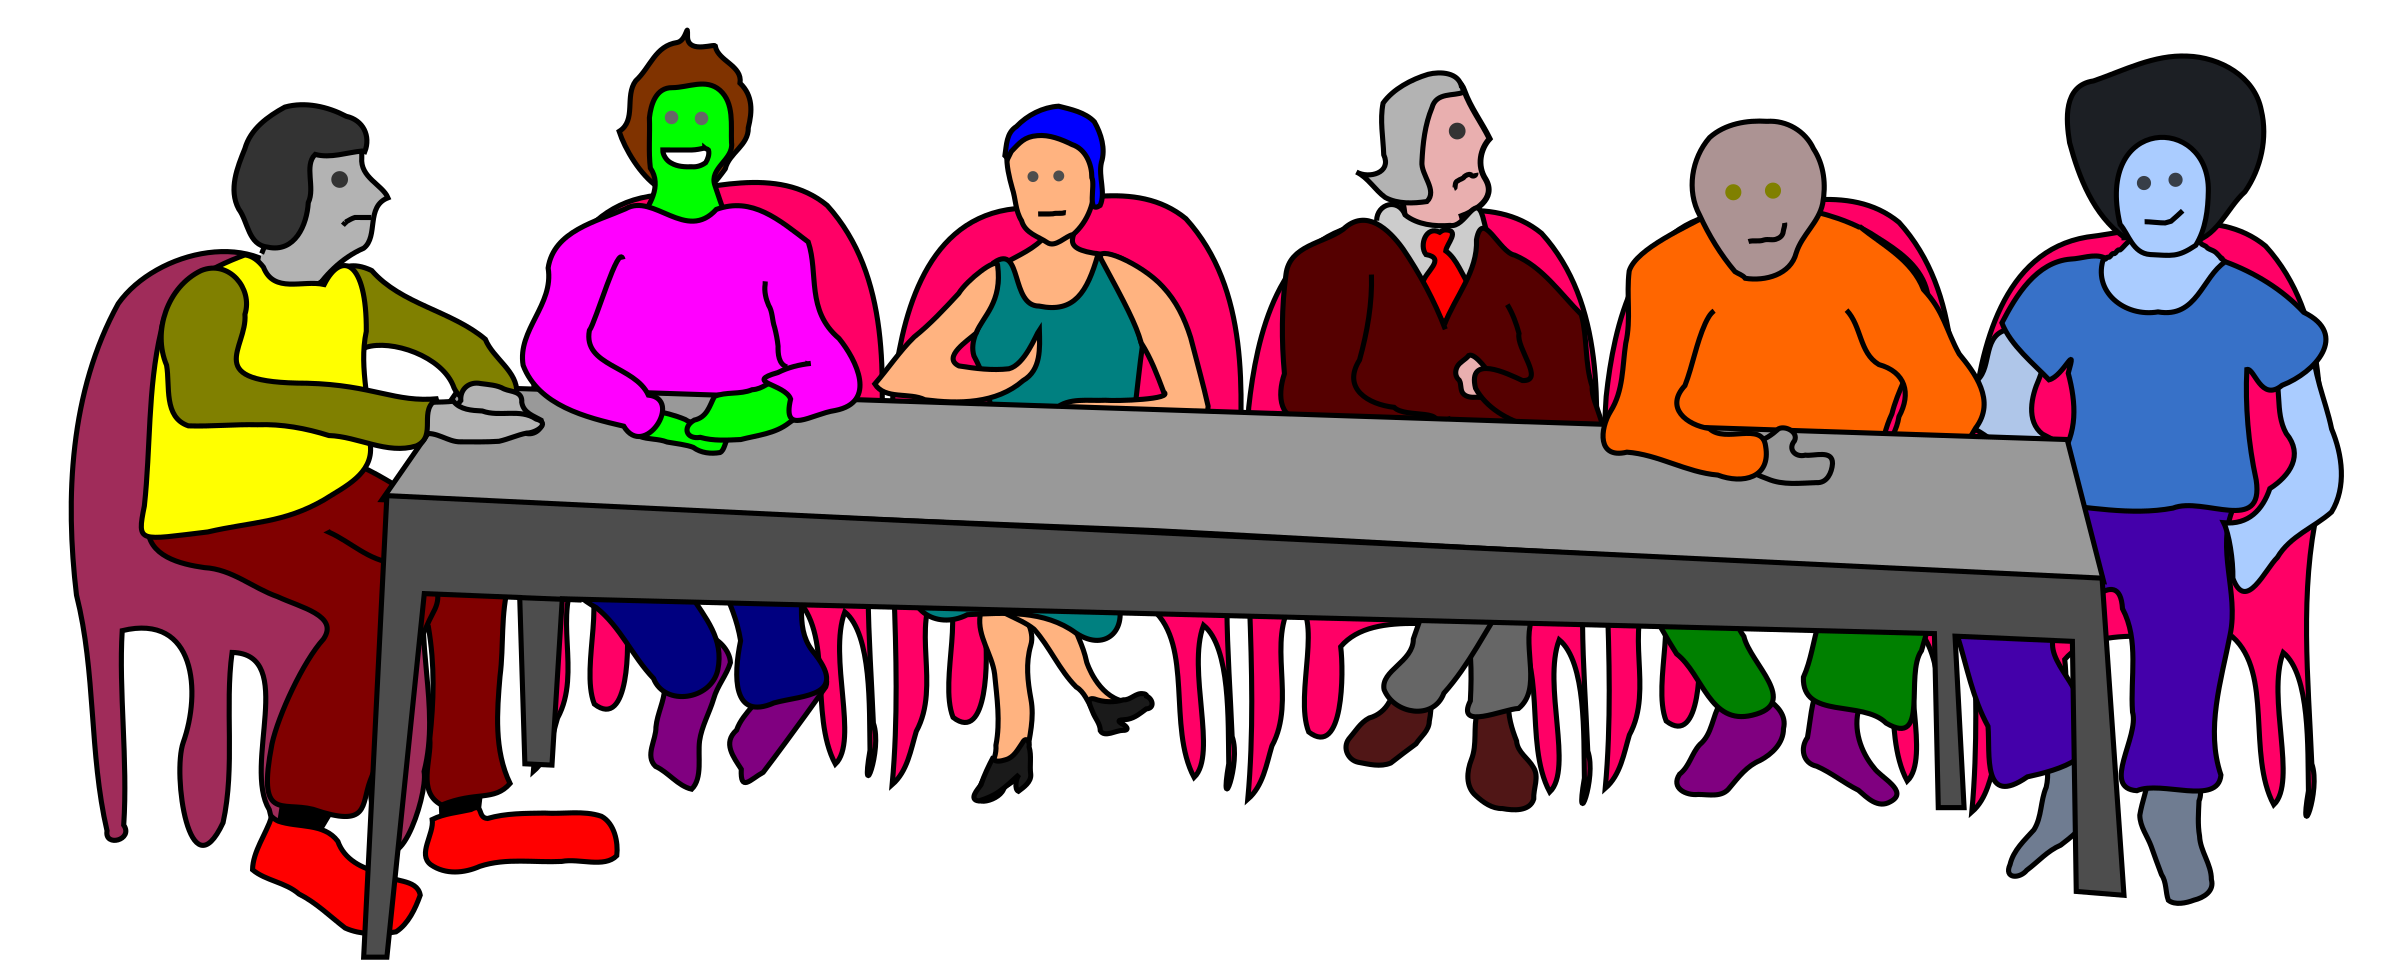 group clipart group meeting